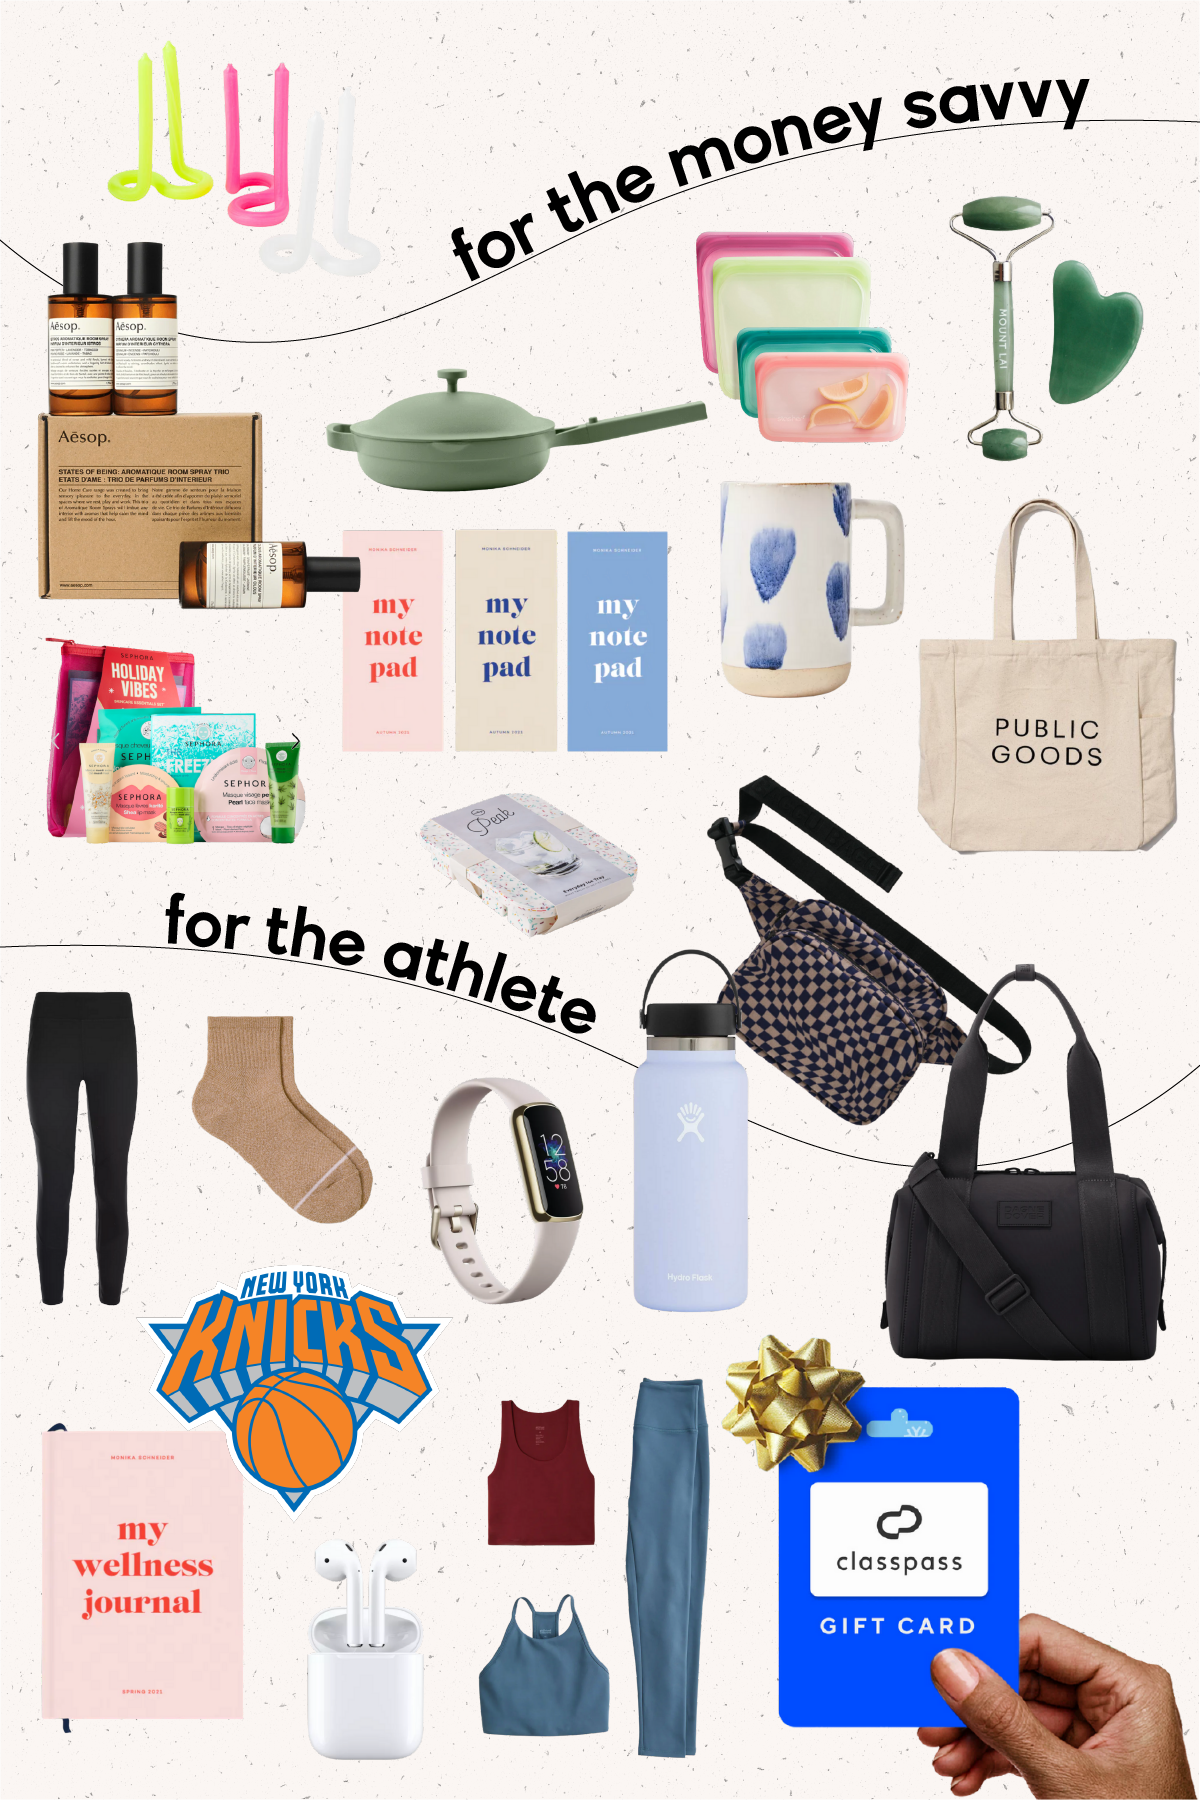 10 Last Minute Gift Ideas Under $25! - Gabby In The City